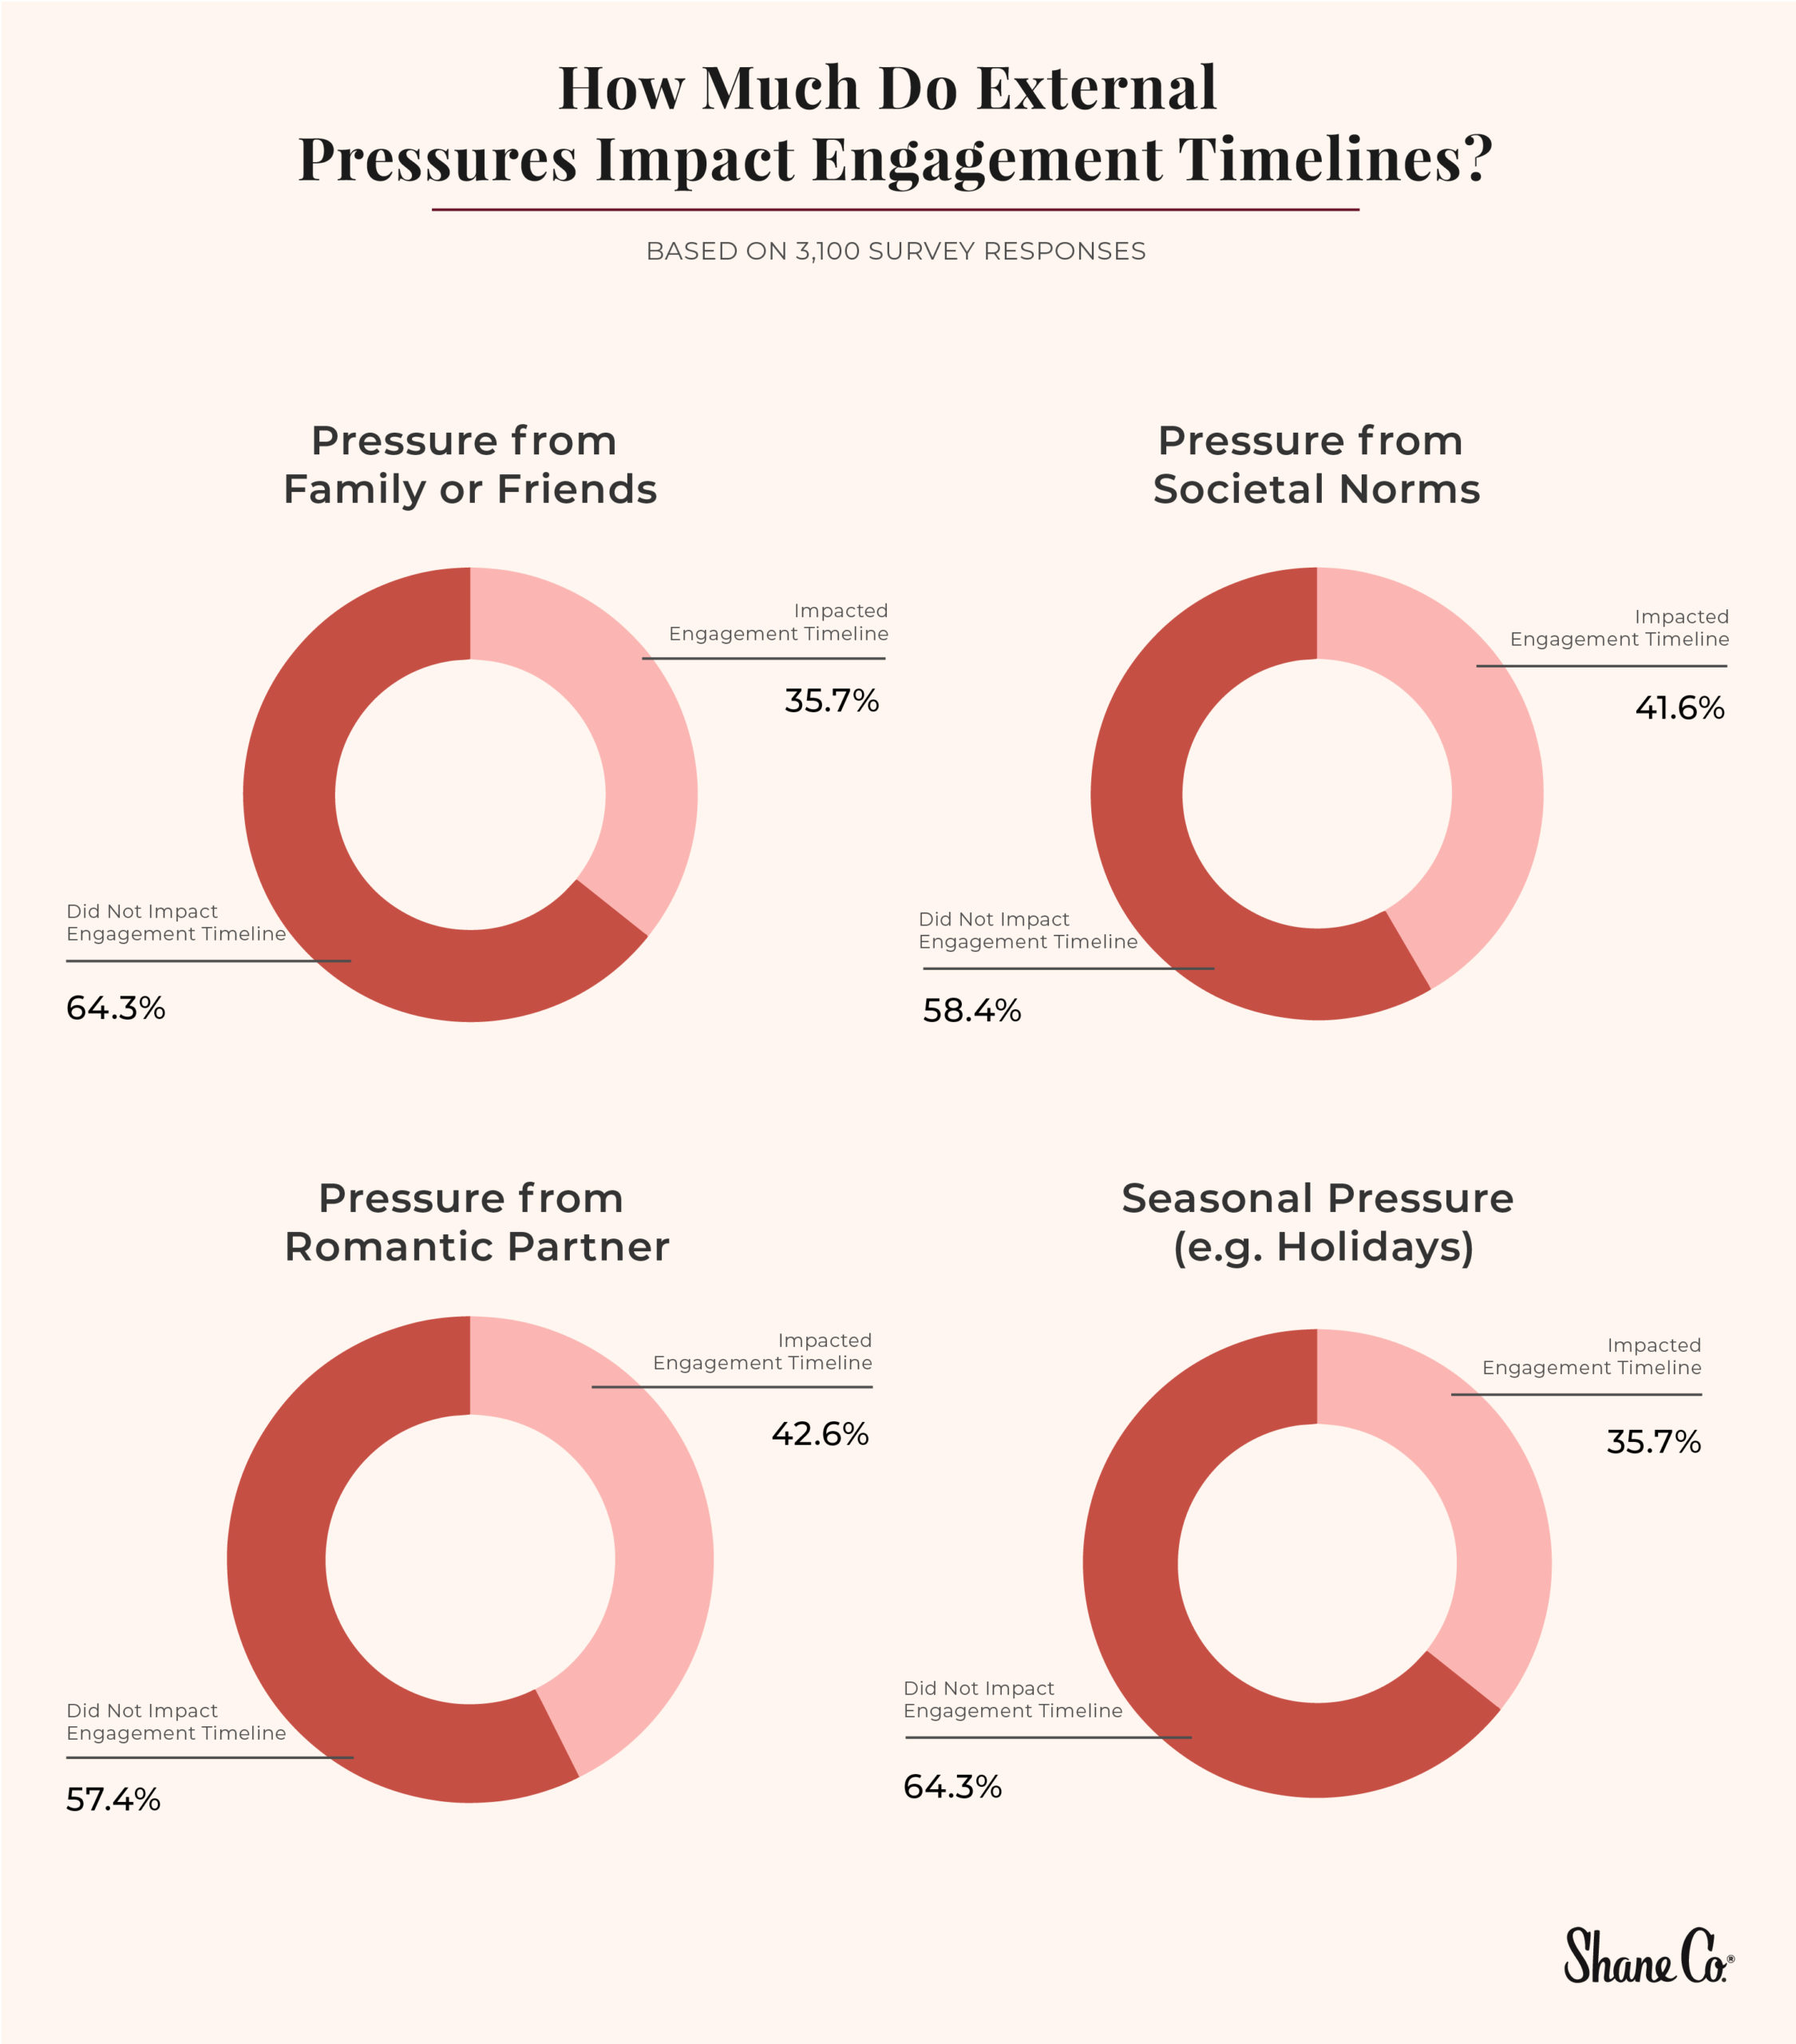 Donut graphs displaying percentage of proposals impacted by external pressures